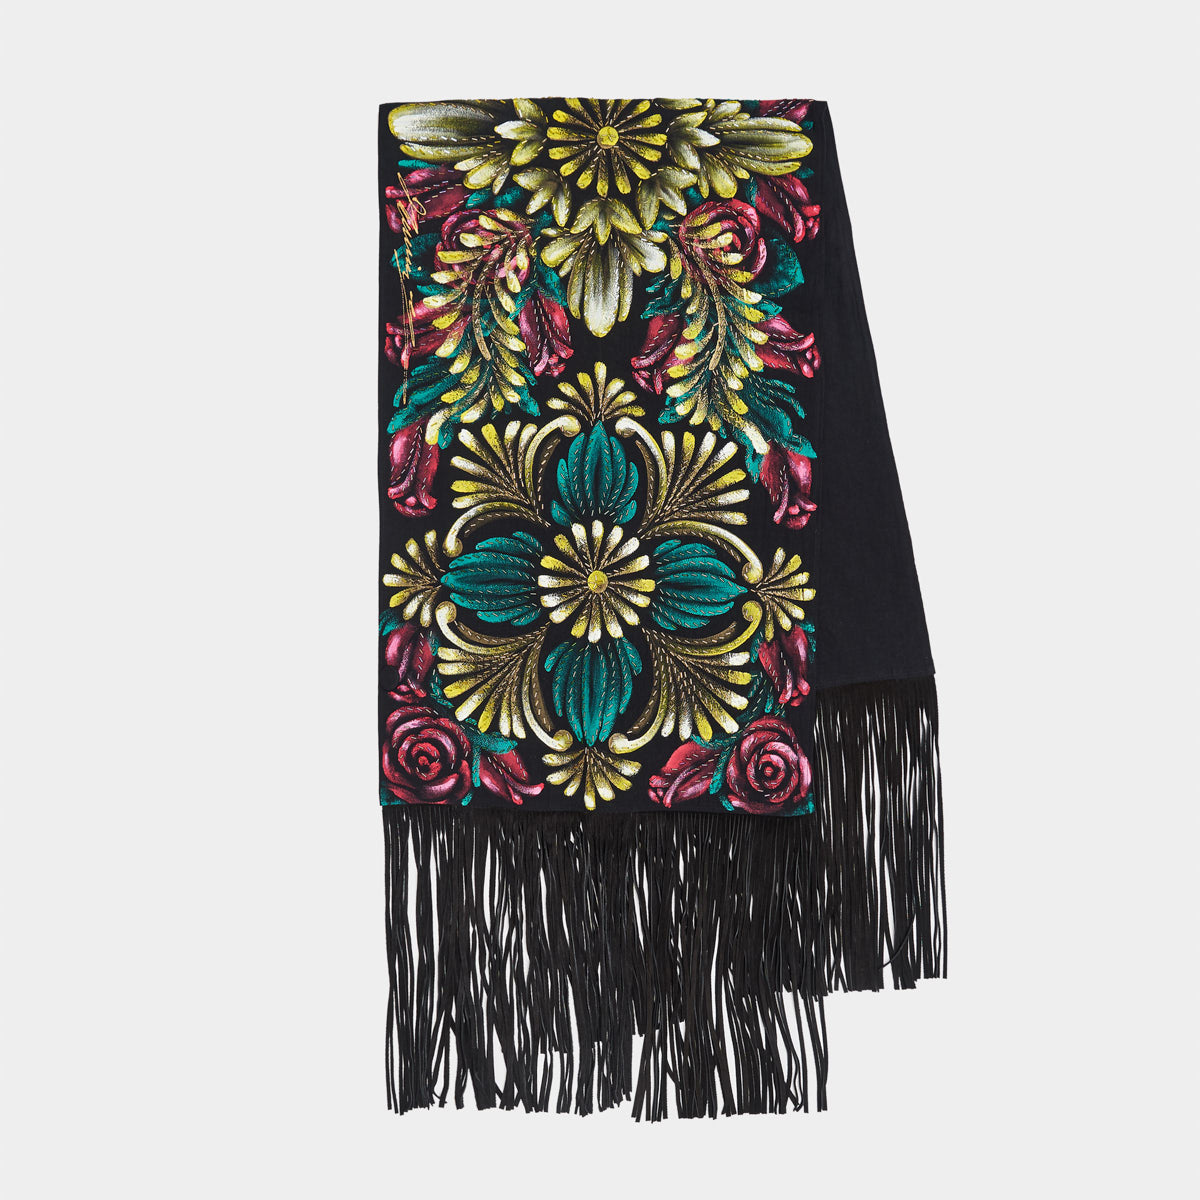 HAND-PAINTED AND HAND-EMBROIDERED SHAWL WITH SUEDE FRINGE